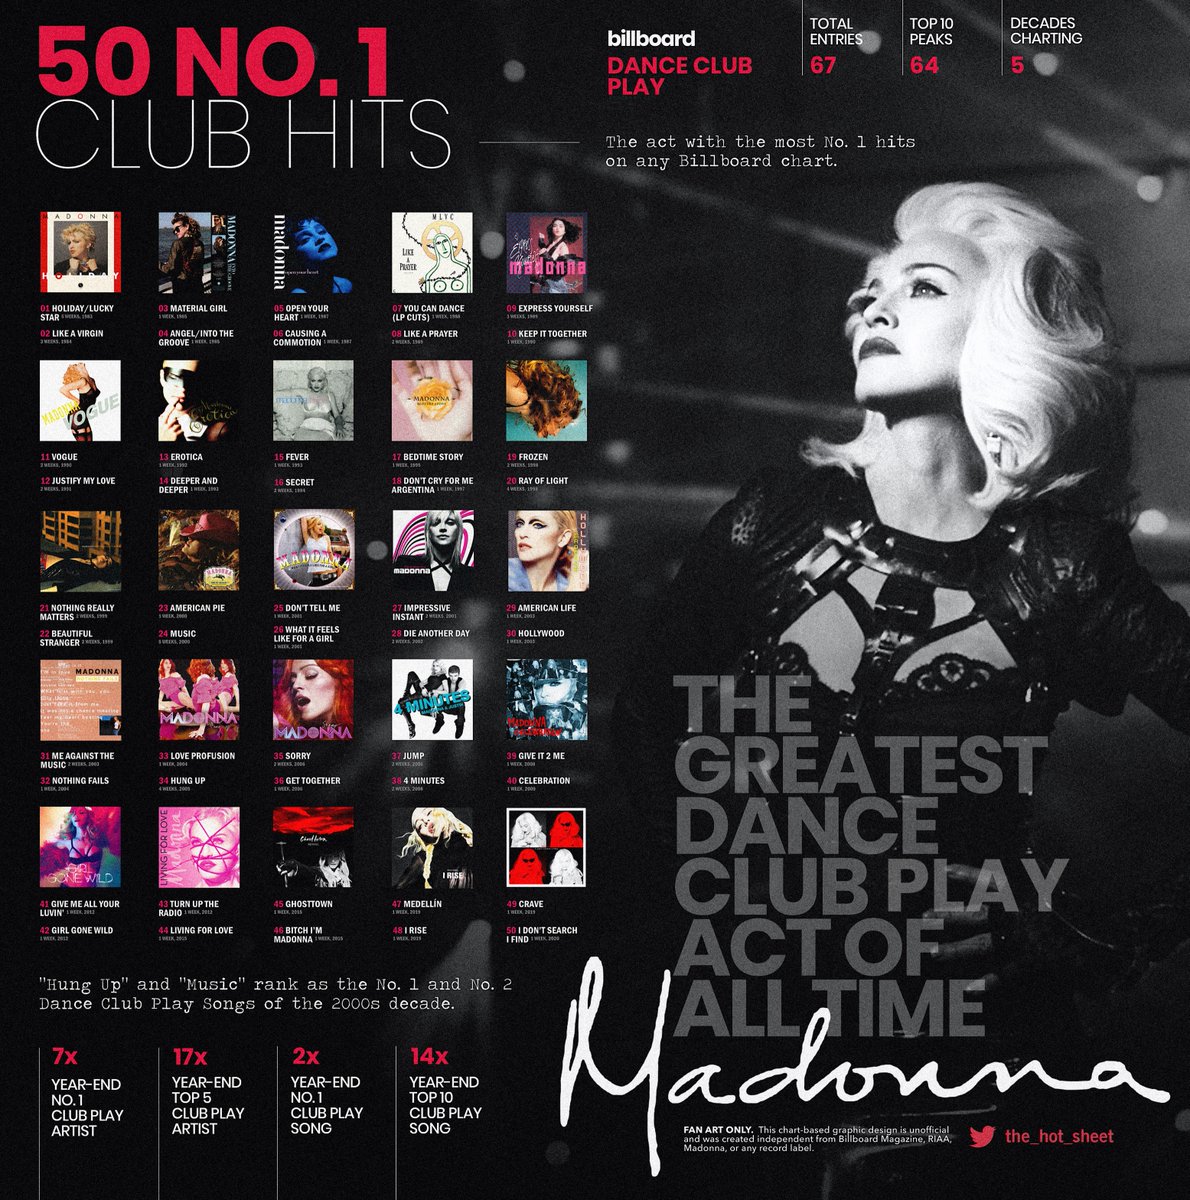 HOT SHEET on Twitter: "HOT SHEET EXTRA : @Madonna has achieved record 50 #1 songs on Billboard's Dance Club Play/Dance Club chart. She is first artist in history